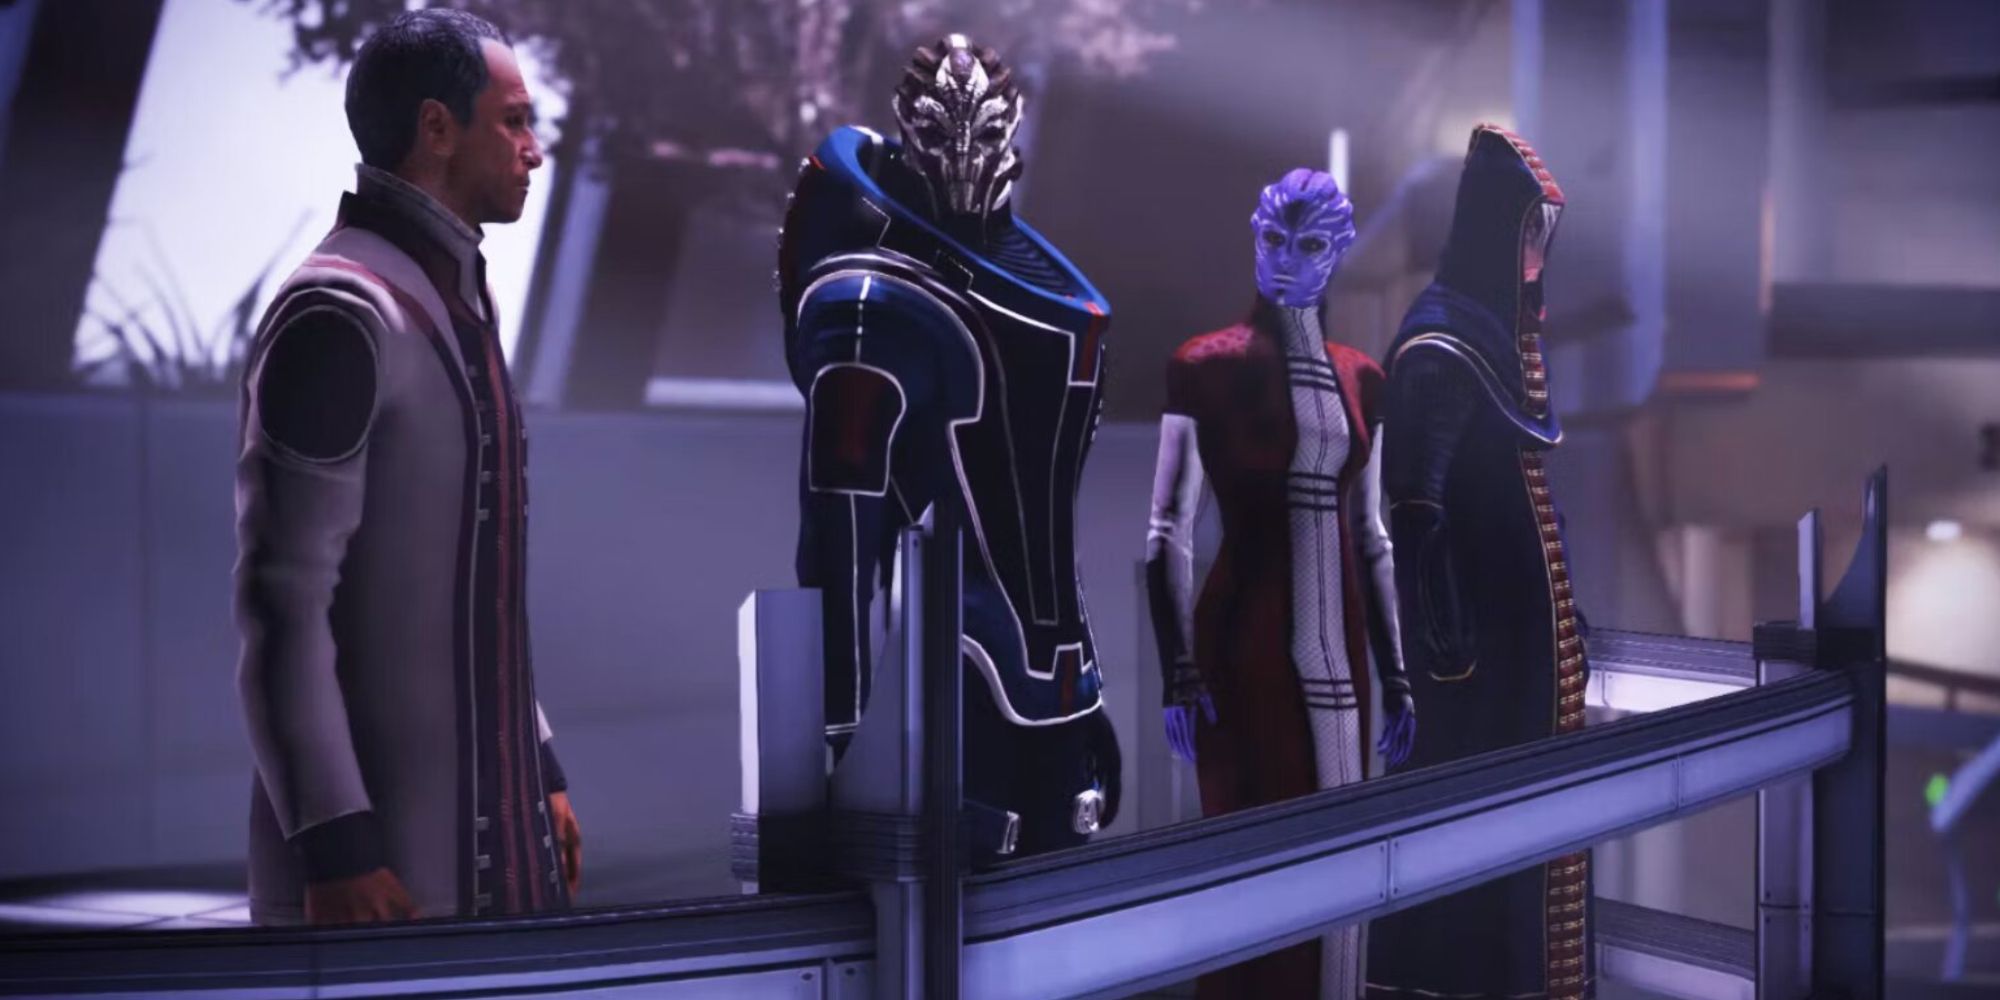 The Citadel Council in Mass Effect